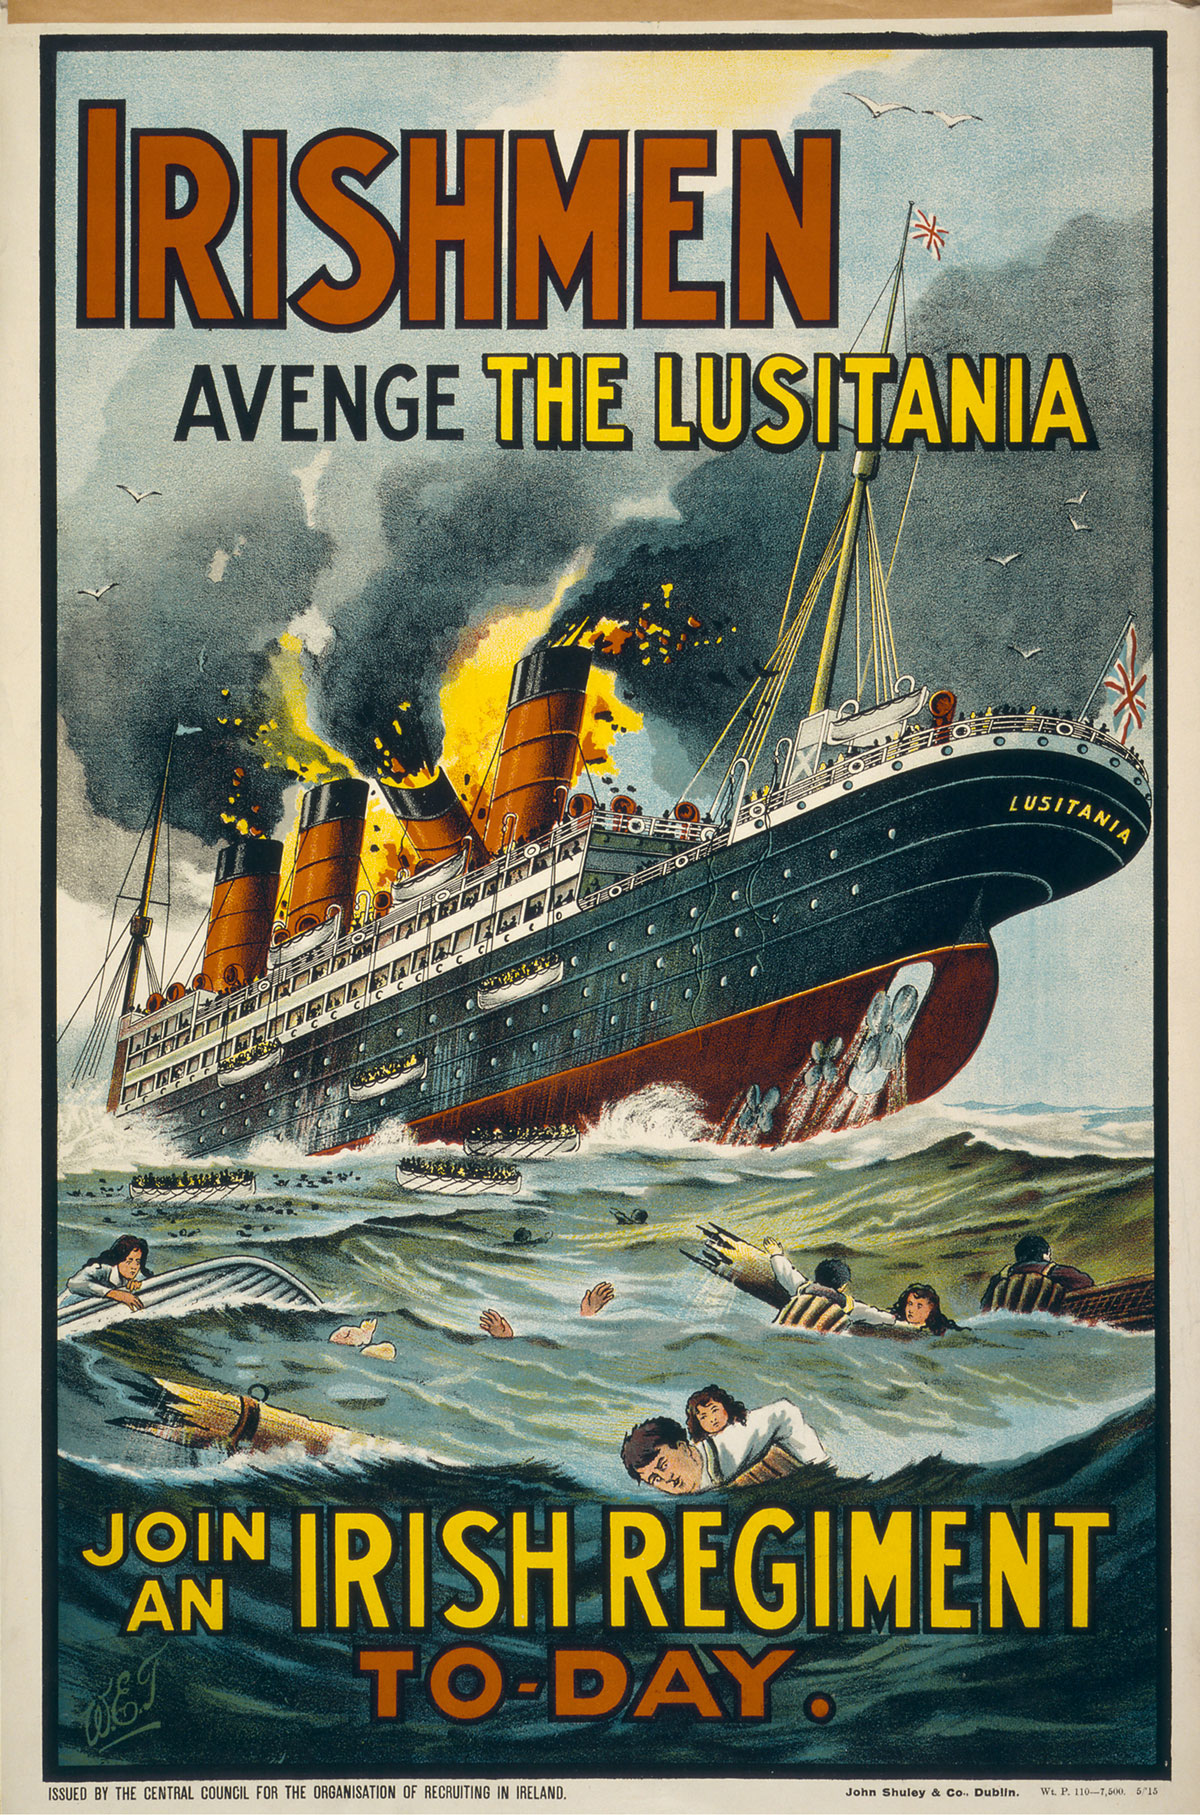 A nineteen fifteen poster from the Central Council for the Organization of Recruiting in Ireland. The poster depicts the sinking of the Lusitania ship and passengers drowning in the sea.